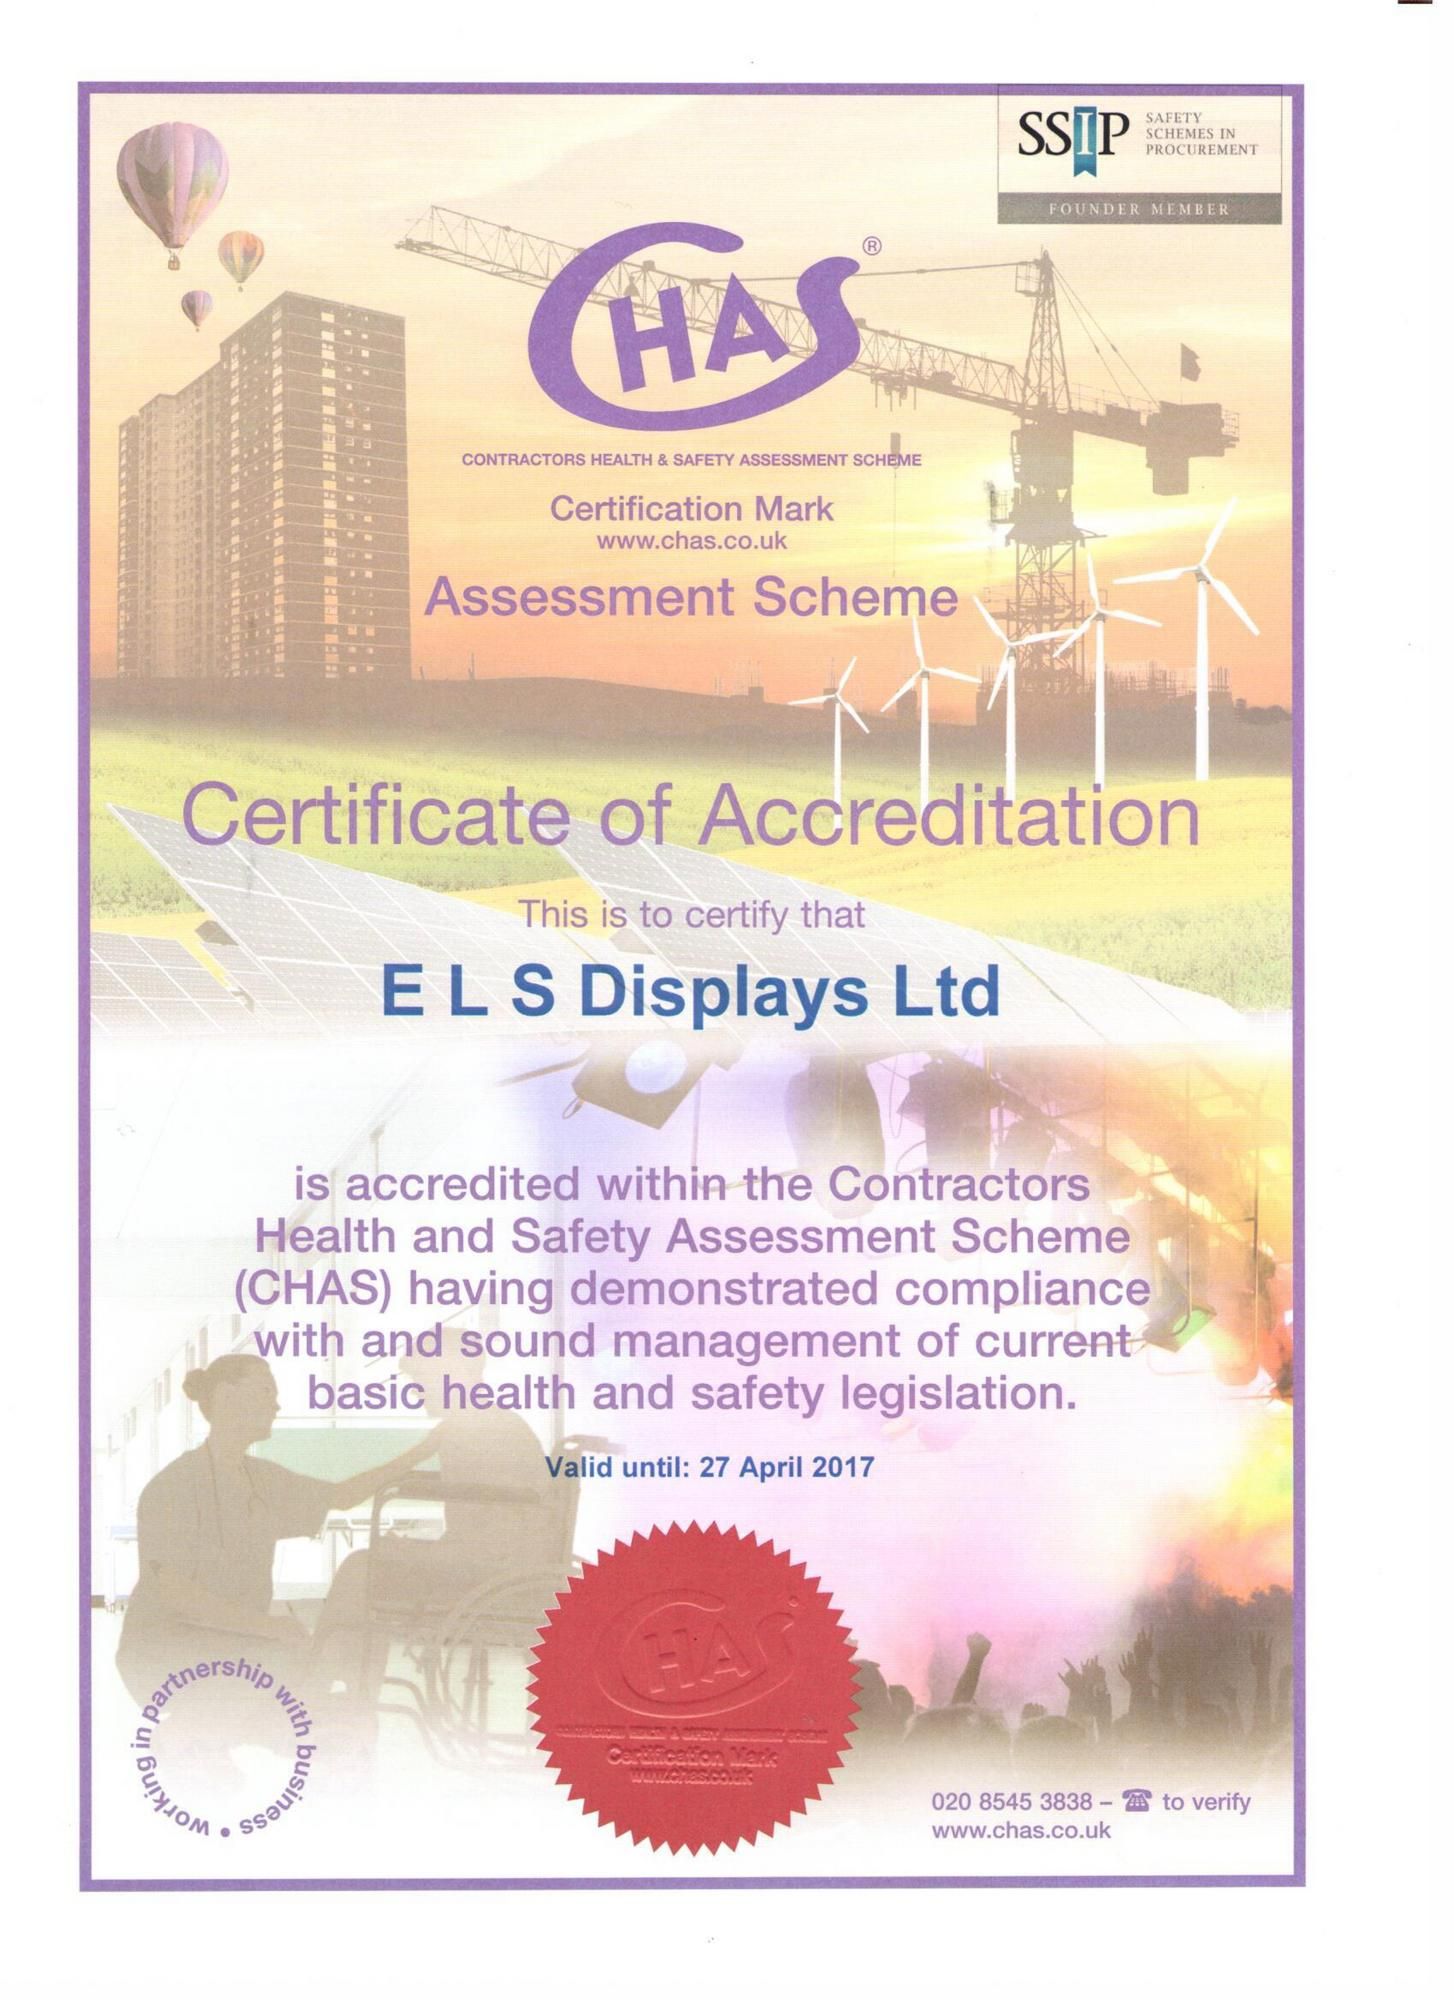 CHAS CERTIFICATION